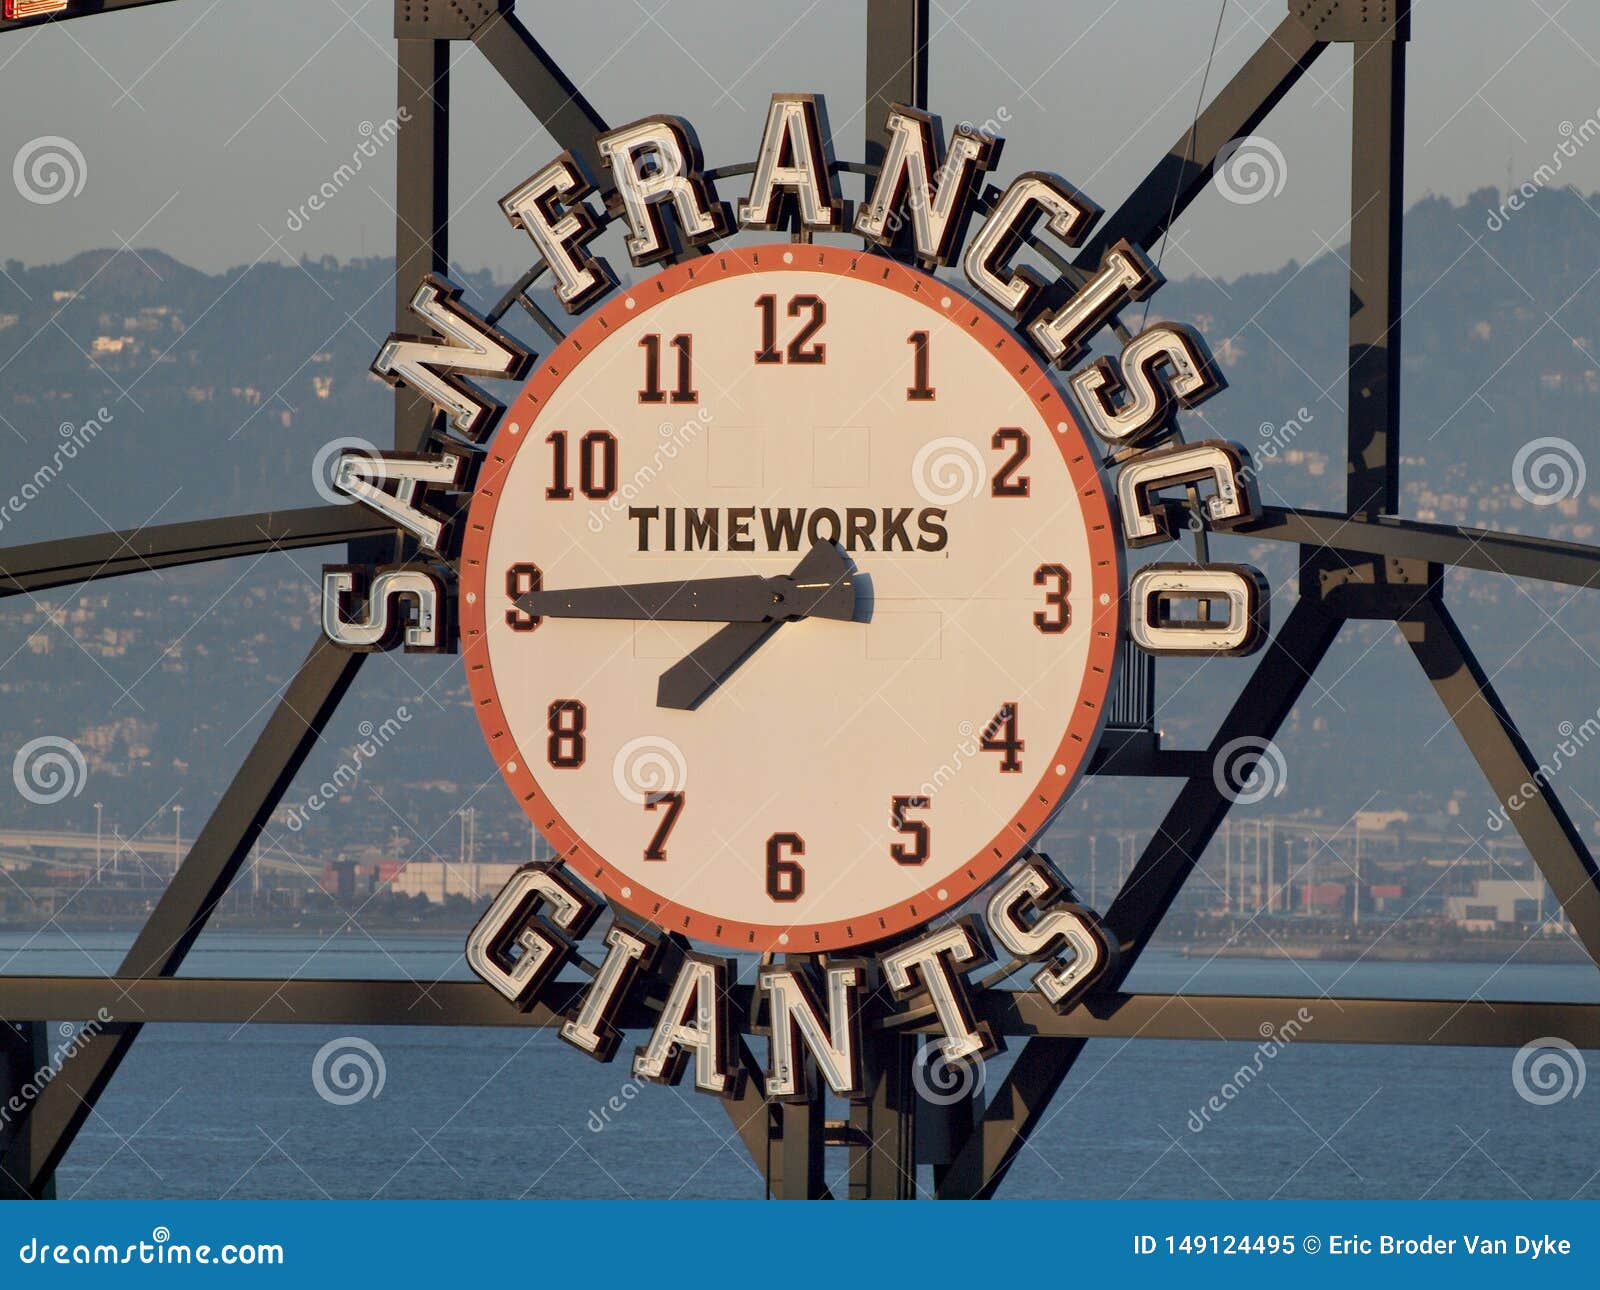 San Francisco Giants Scoreboard Clock by TimeWorks Editorial Image - Image  of outdoor, ballpark: 149124495